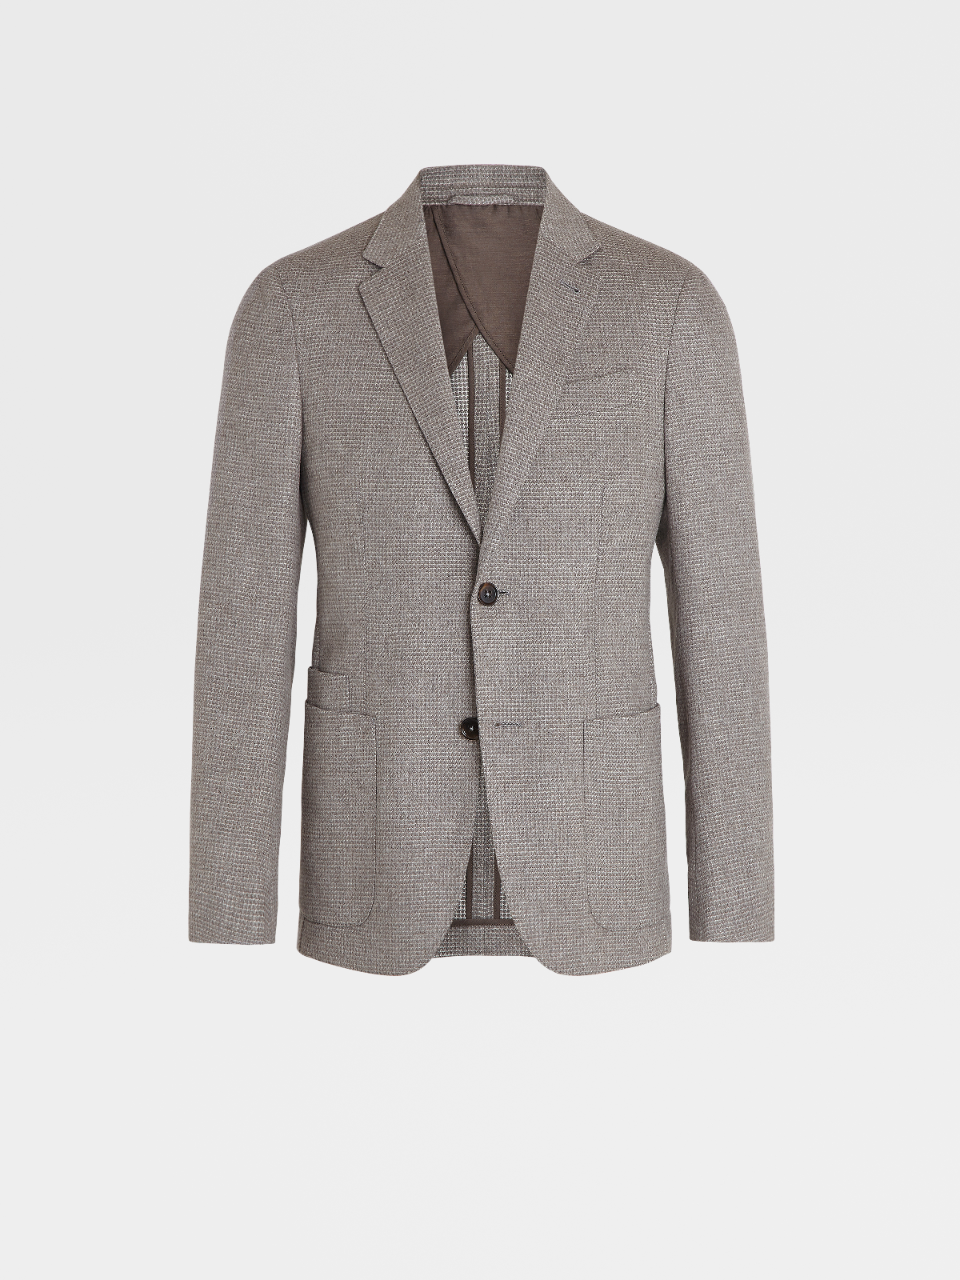 Wool Silk and Cashmere Textured Jacket